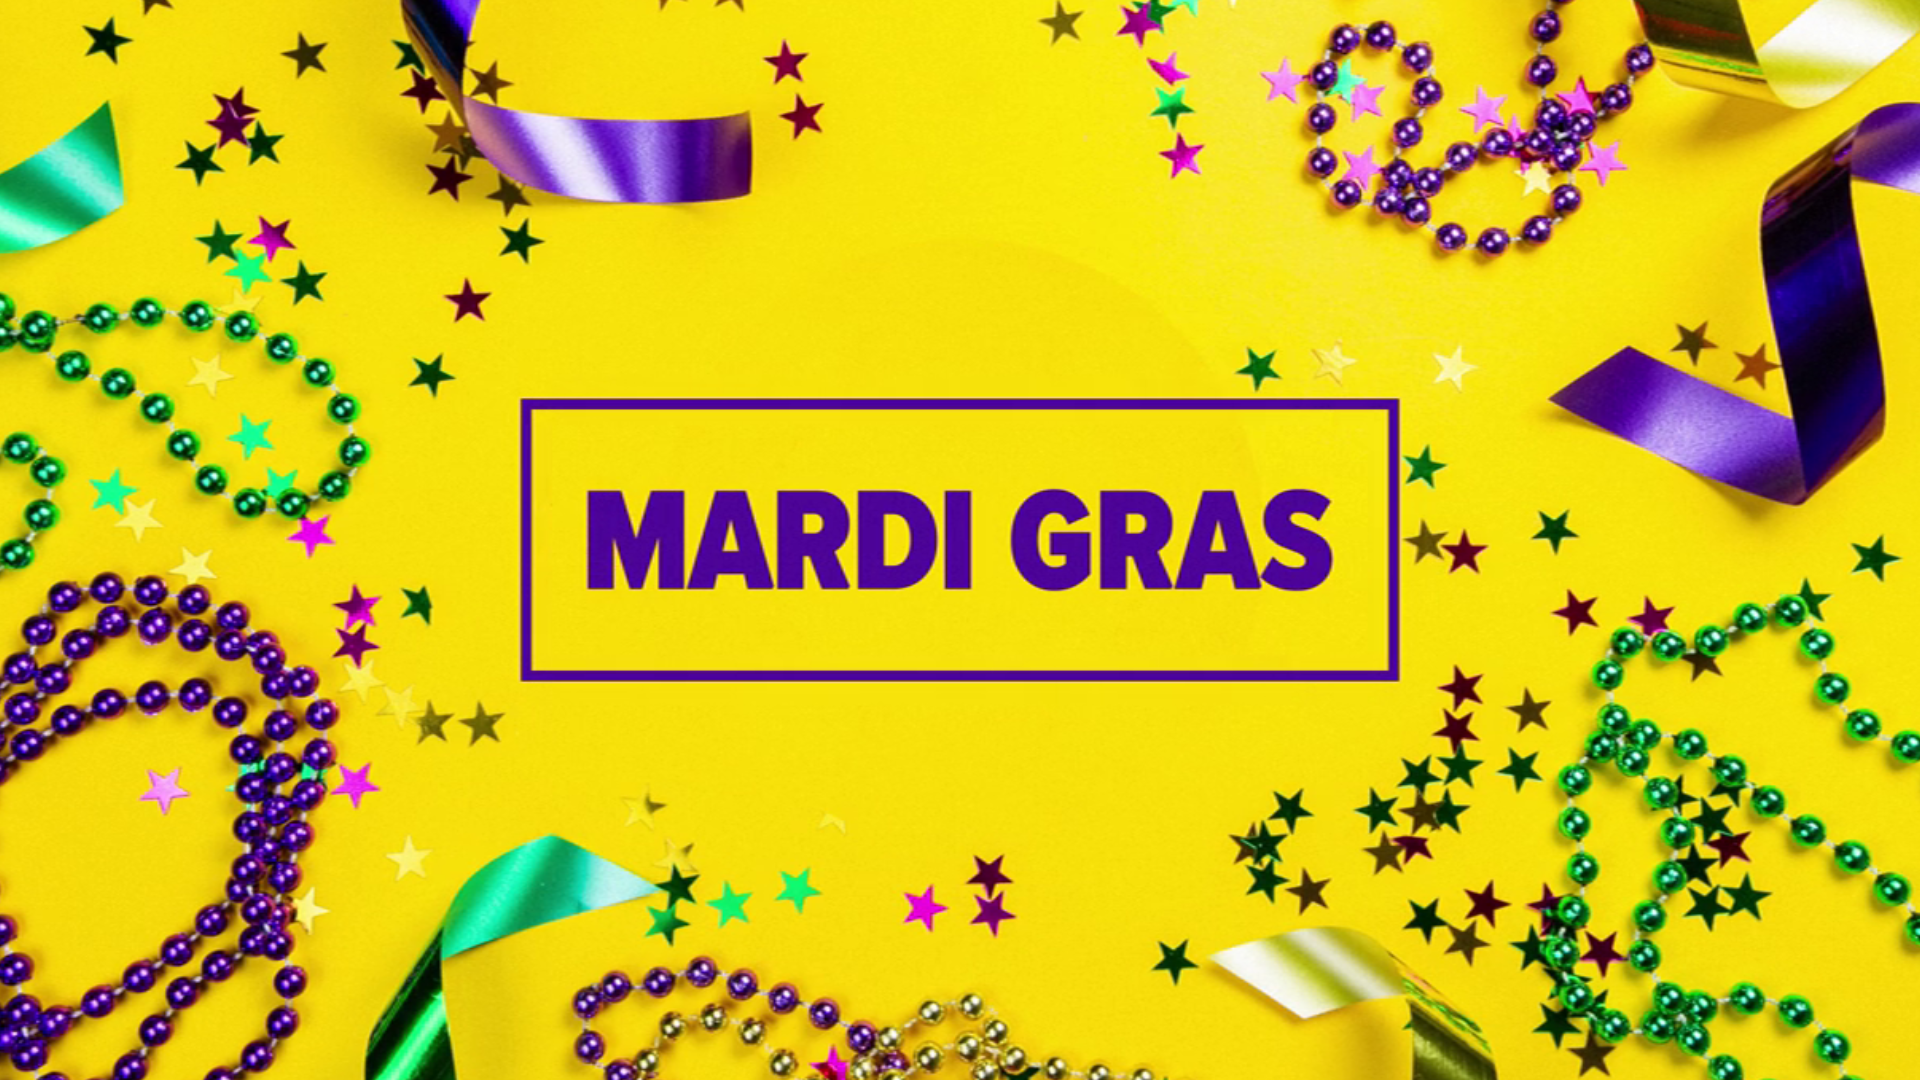 Here are some events you can attend to celebrate Mardi Gras in Central Georgia!